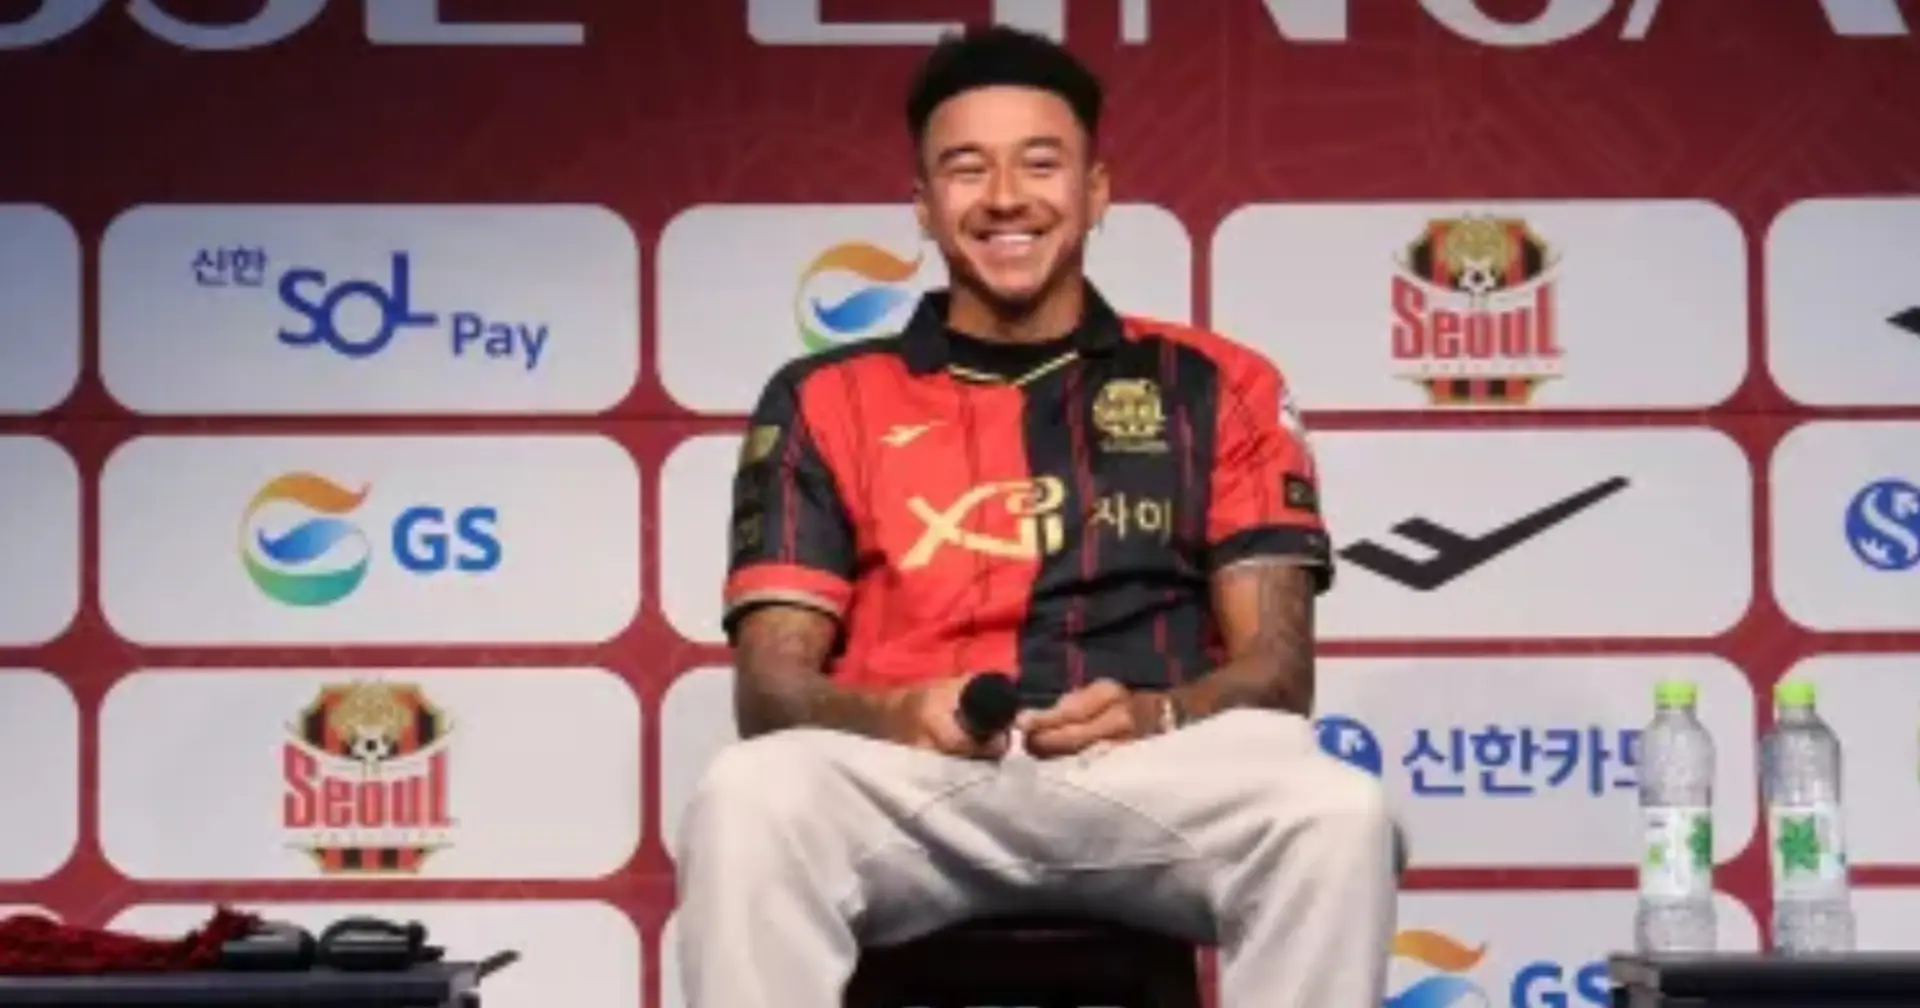 'The most important thing is football': Jesse Lingard dismisses theories around his South Korea move